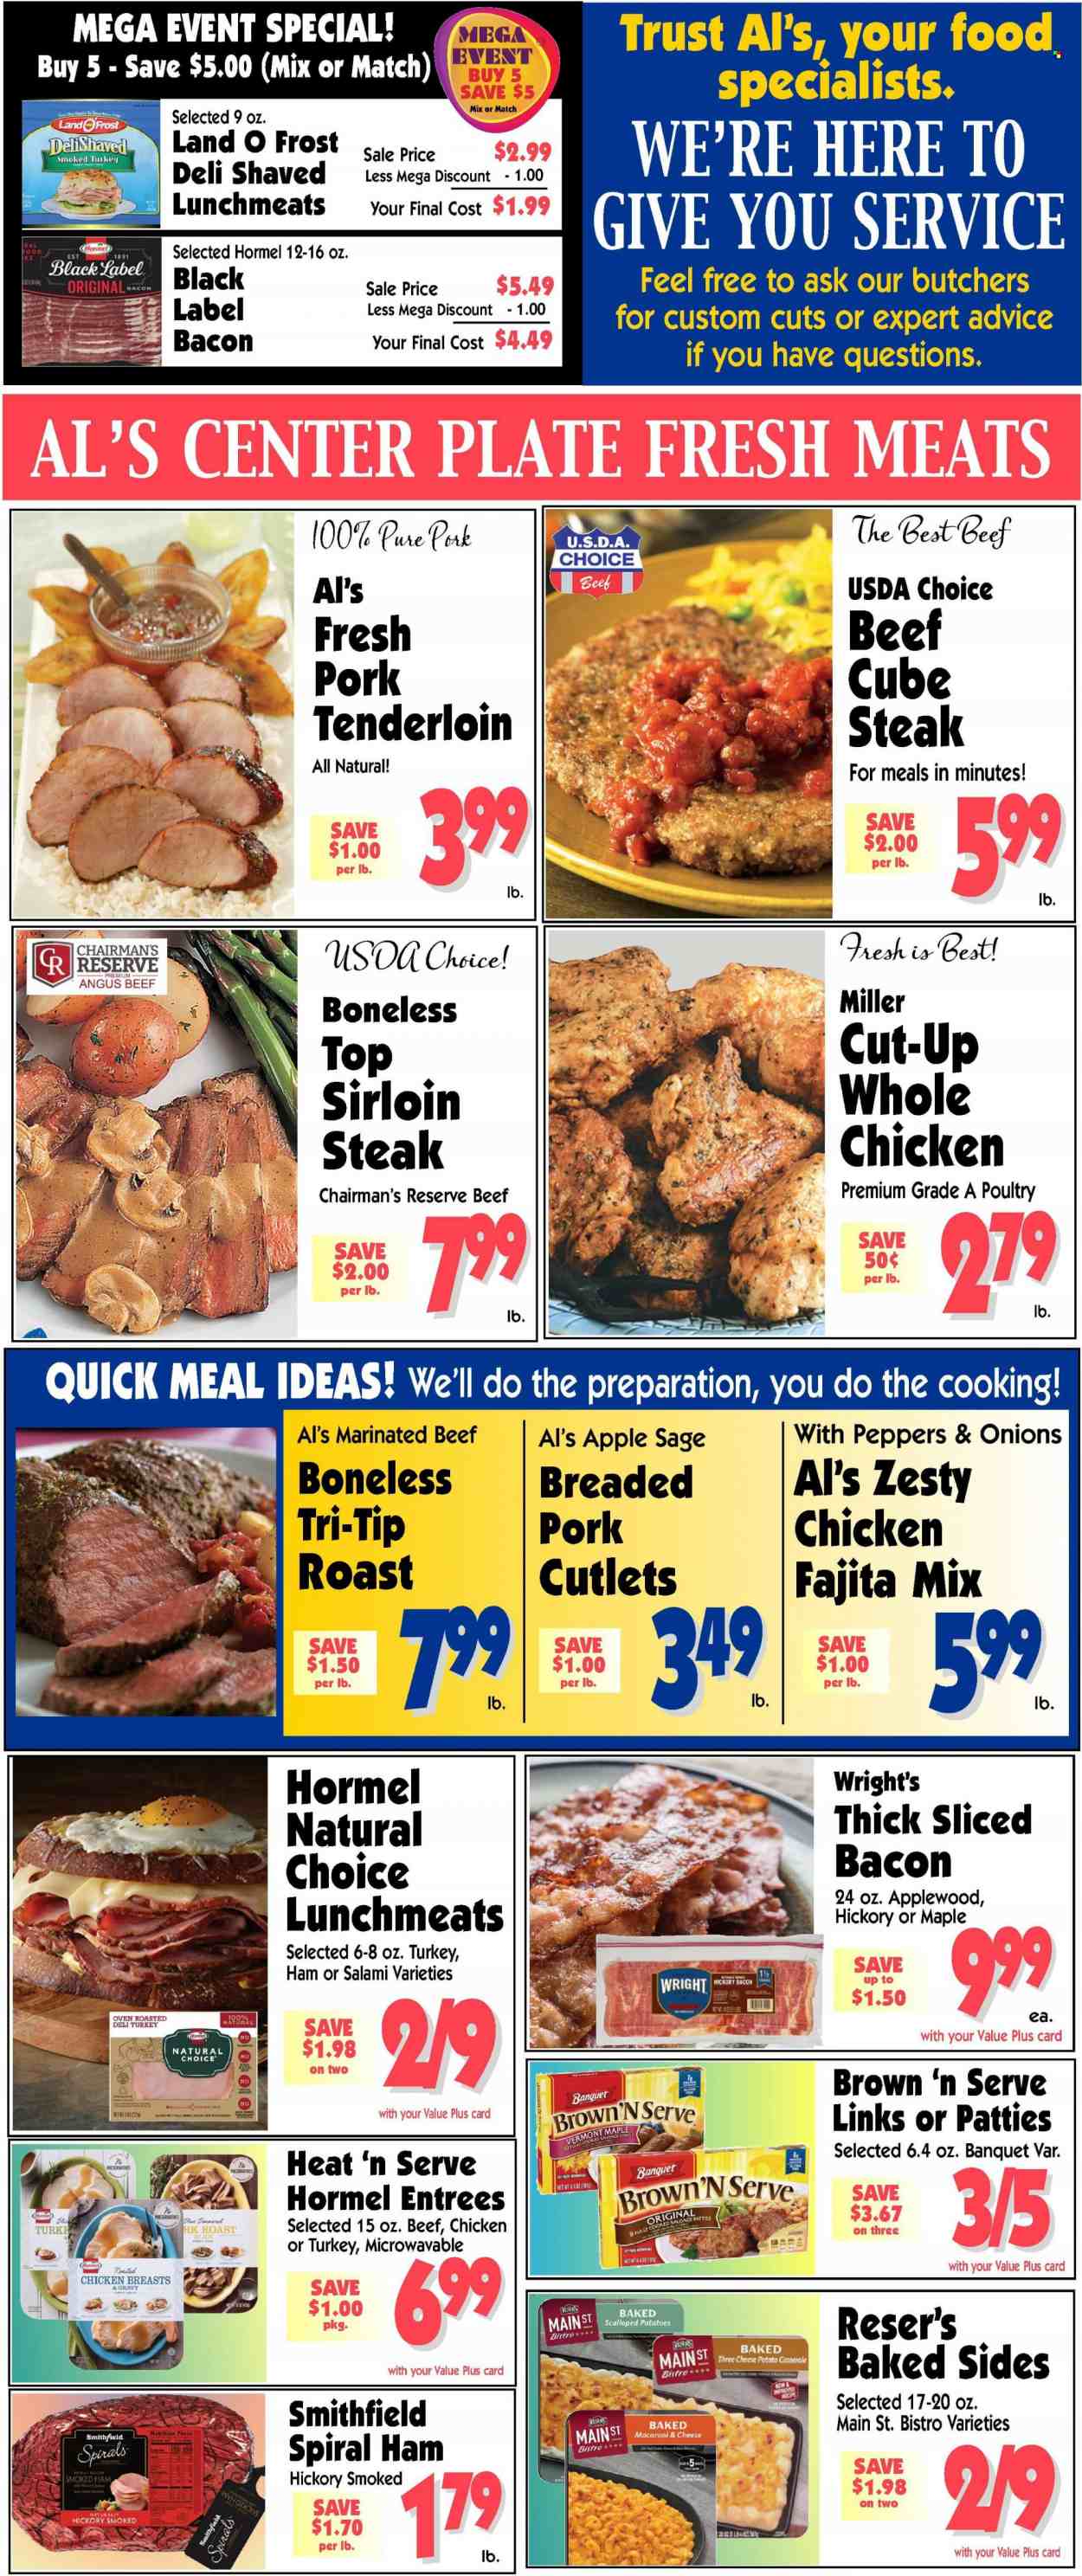 thumbnail - Al's Supermarket Flyer - 02/01/2023 - 02/07/2023 - Sales products - Ace, potatoes, onion, macaroni & cheese, chicken roast, Hormel, fajita mix, bacon, salami, ham, hickory bacon, spiral ham, sausage, Brown 'N Serve, lunch meat, Miller, whole chicken, beef meat, beef sirloin, steak, sirloin steak, marinated beef, pork meat, pork tenderloin, plate, casserole, Trust. Page 2.